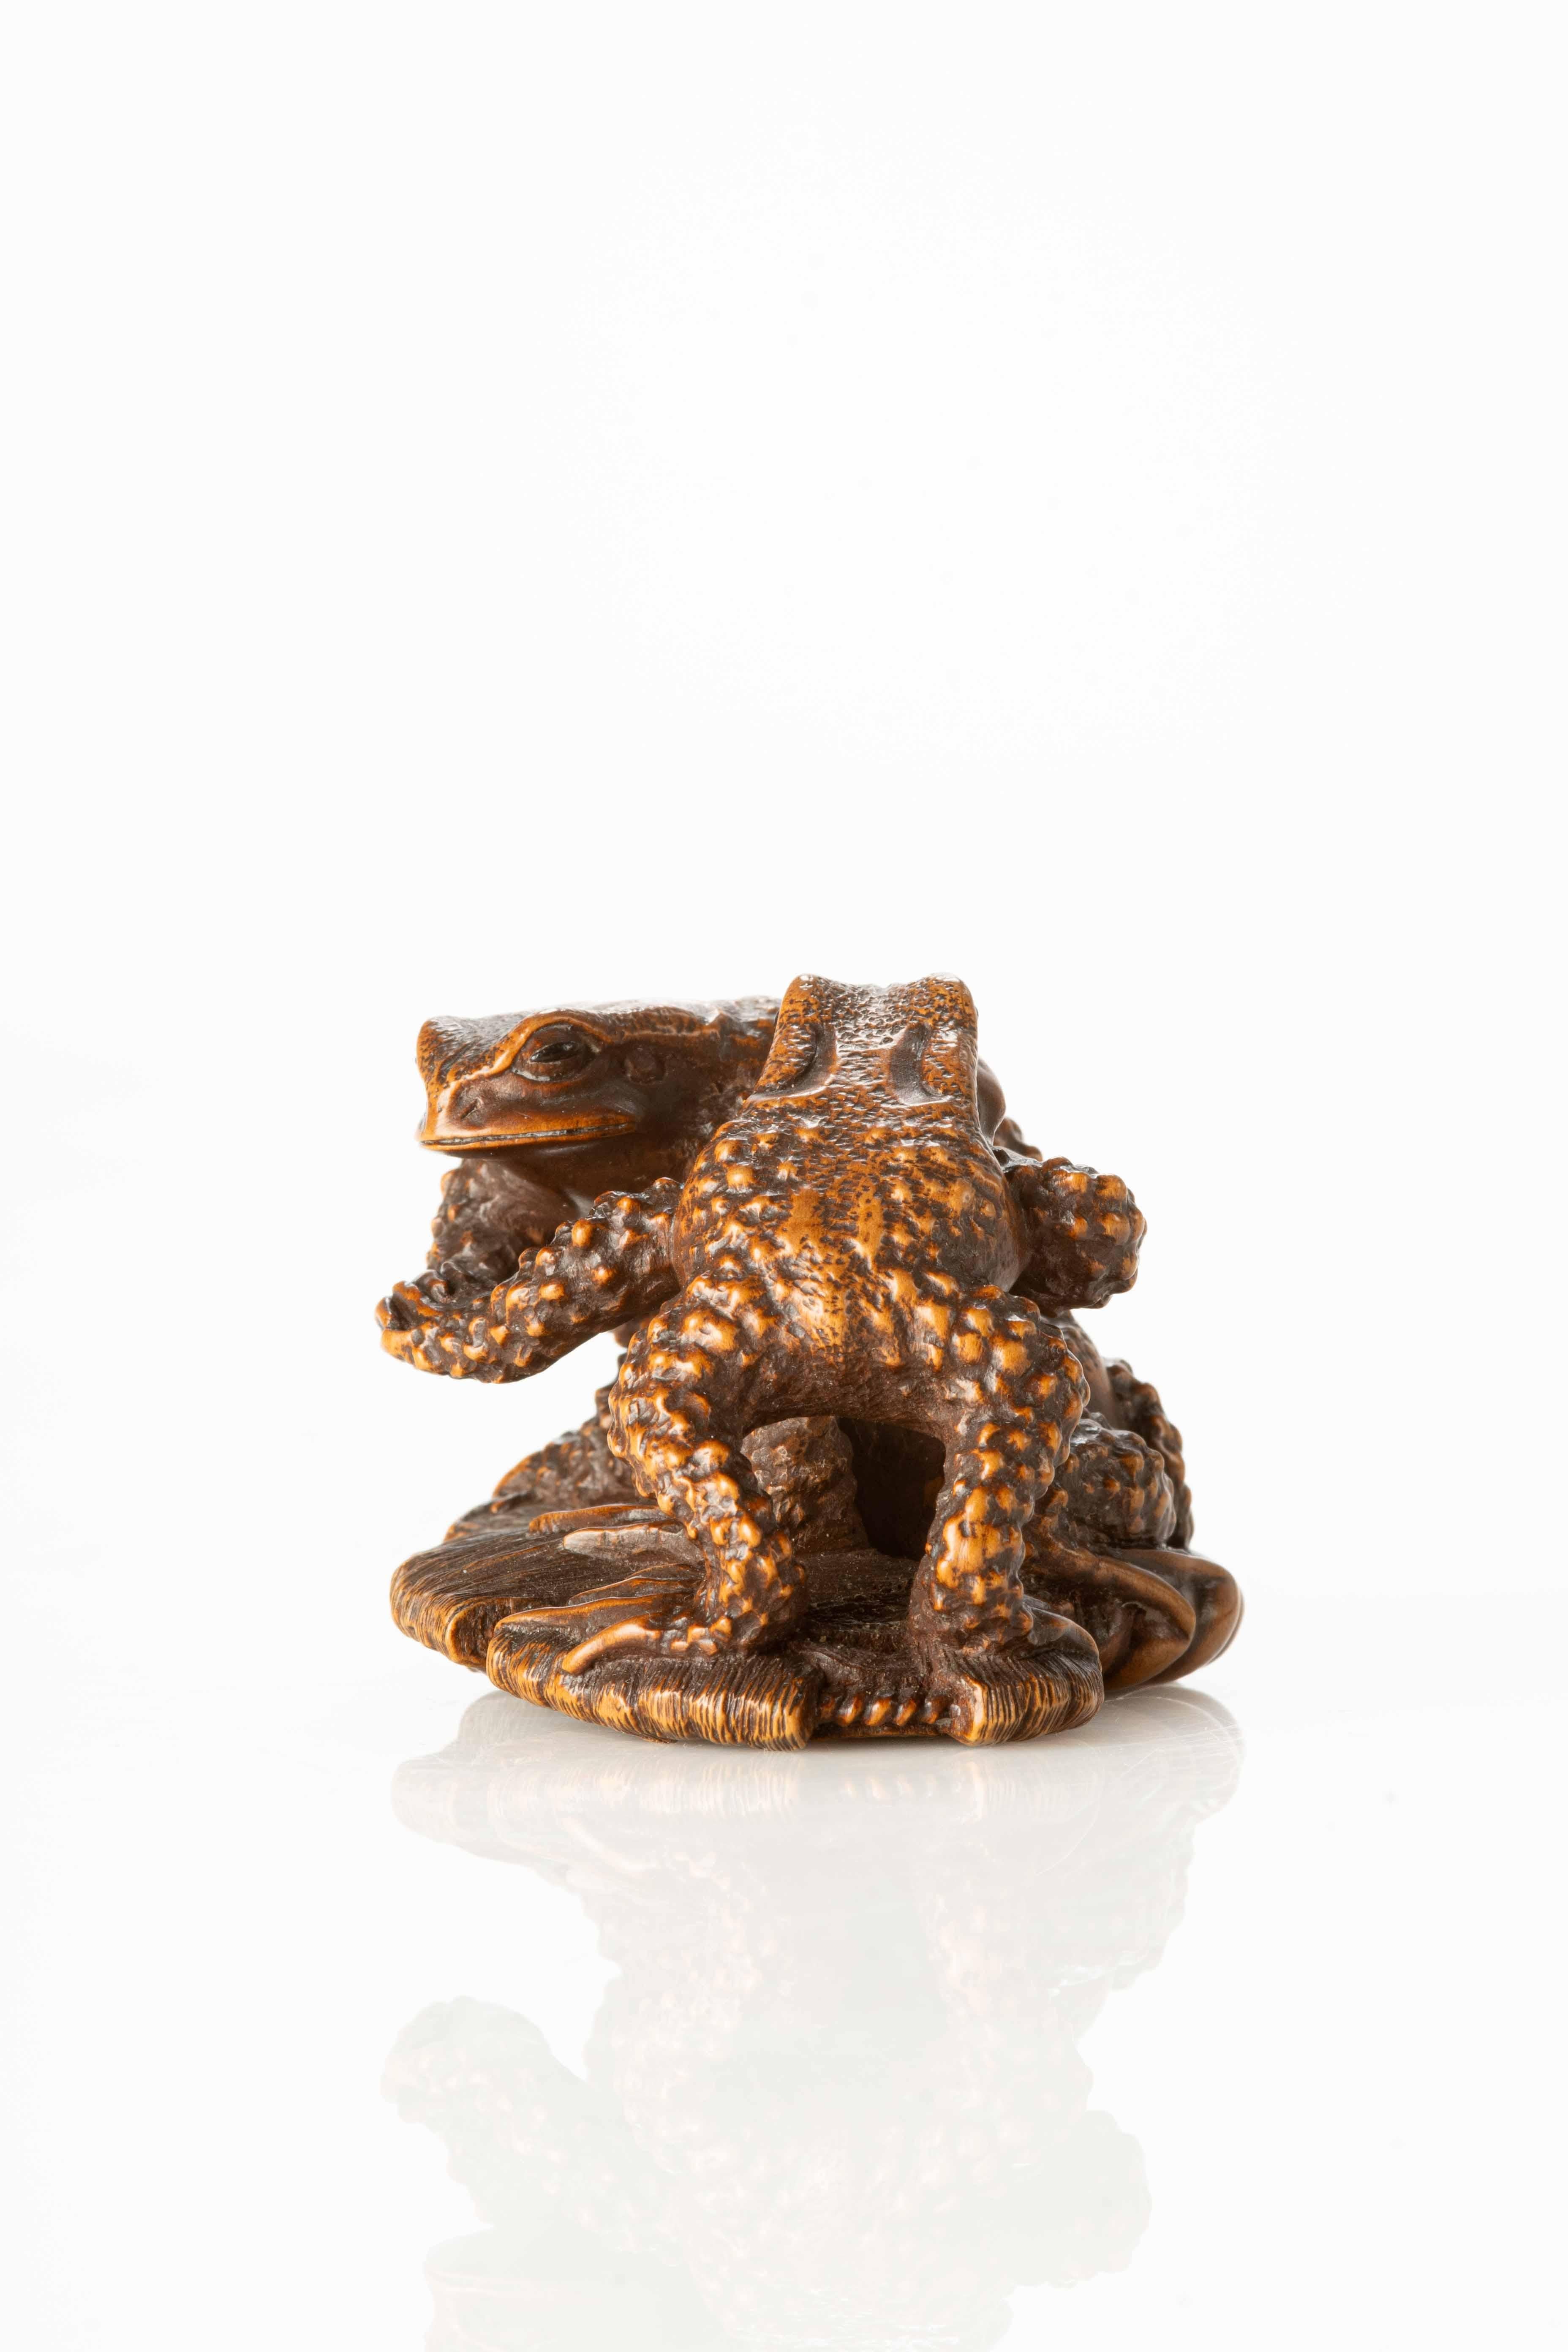 Boxwood netsuke depicting three toads on a sandal, two of them engaged in a fight, assuming the typical position of sumo wrestlers with their front legs raised and their bodies leaning against each other.

The wrinkled skin and warts on their bodies